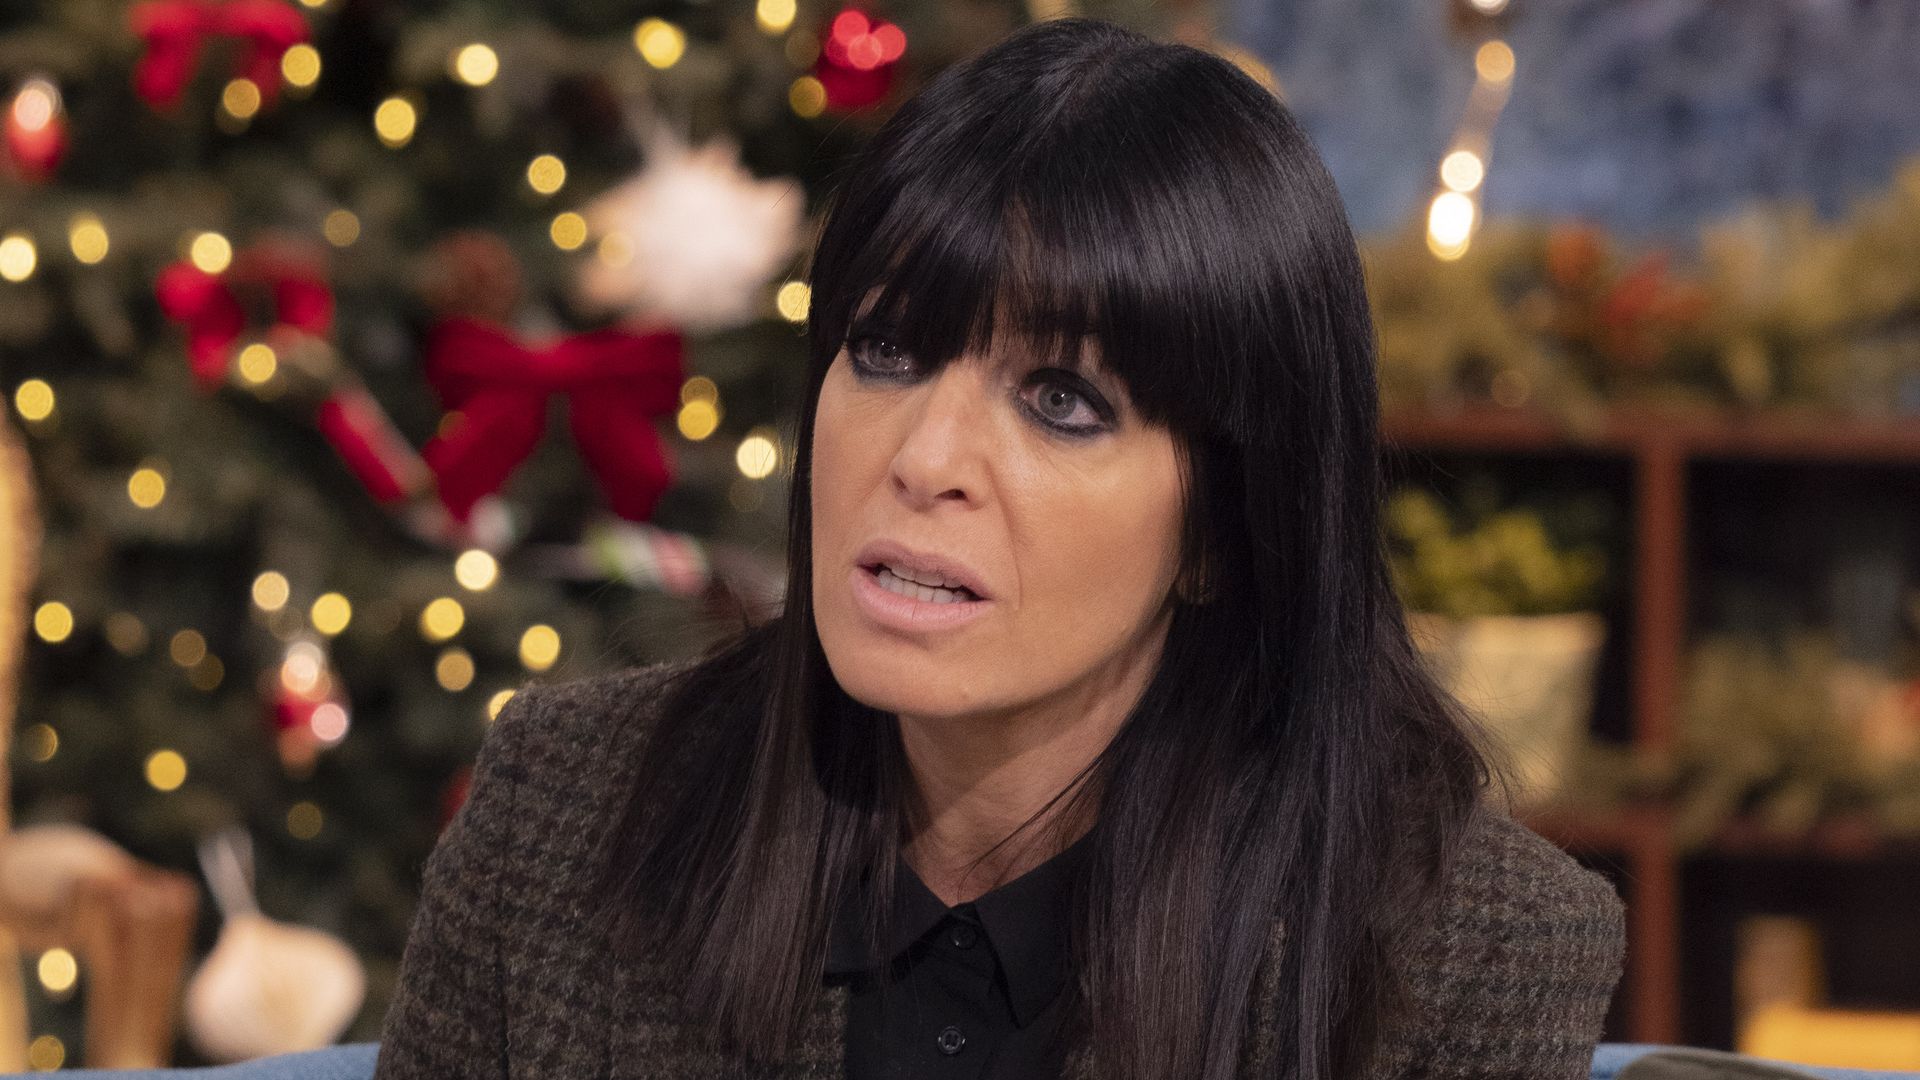 Claudia Winkleman shares emotional 'goodbye' as she leaves BBC role